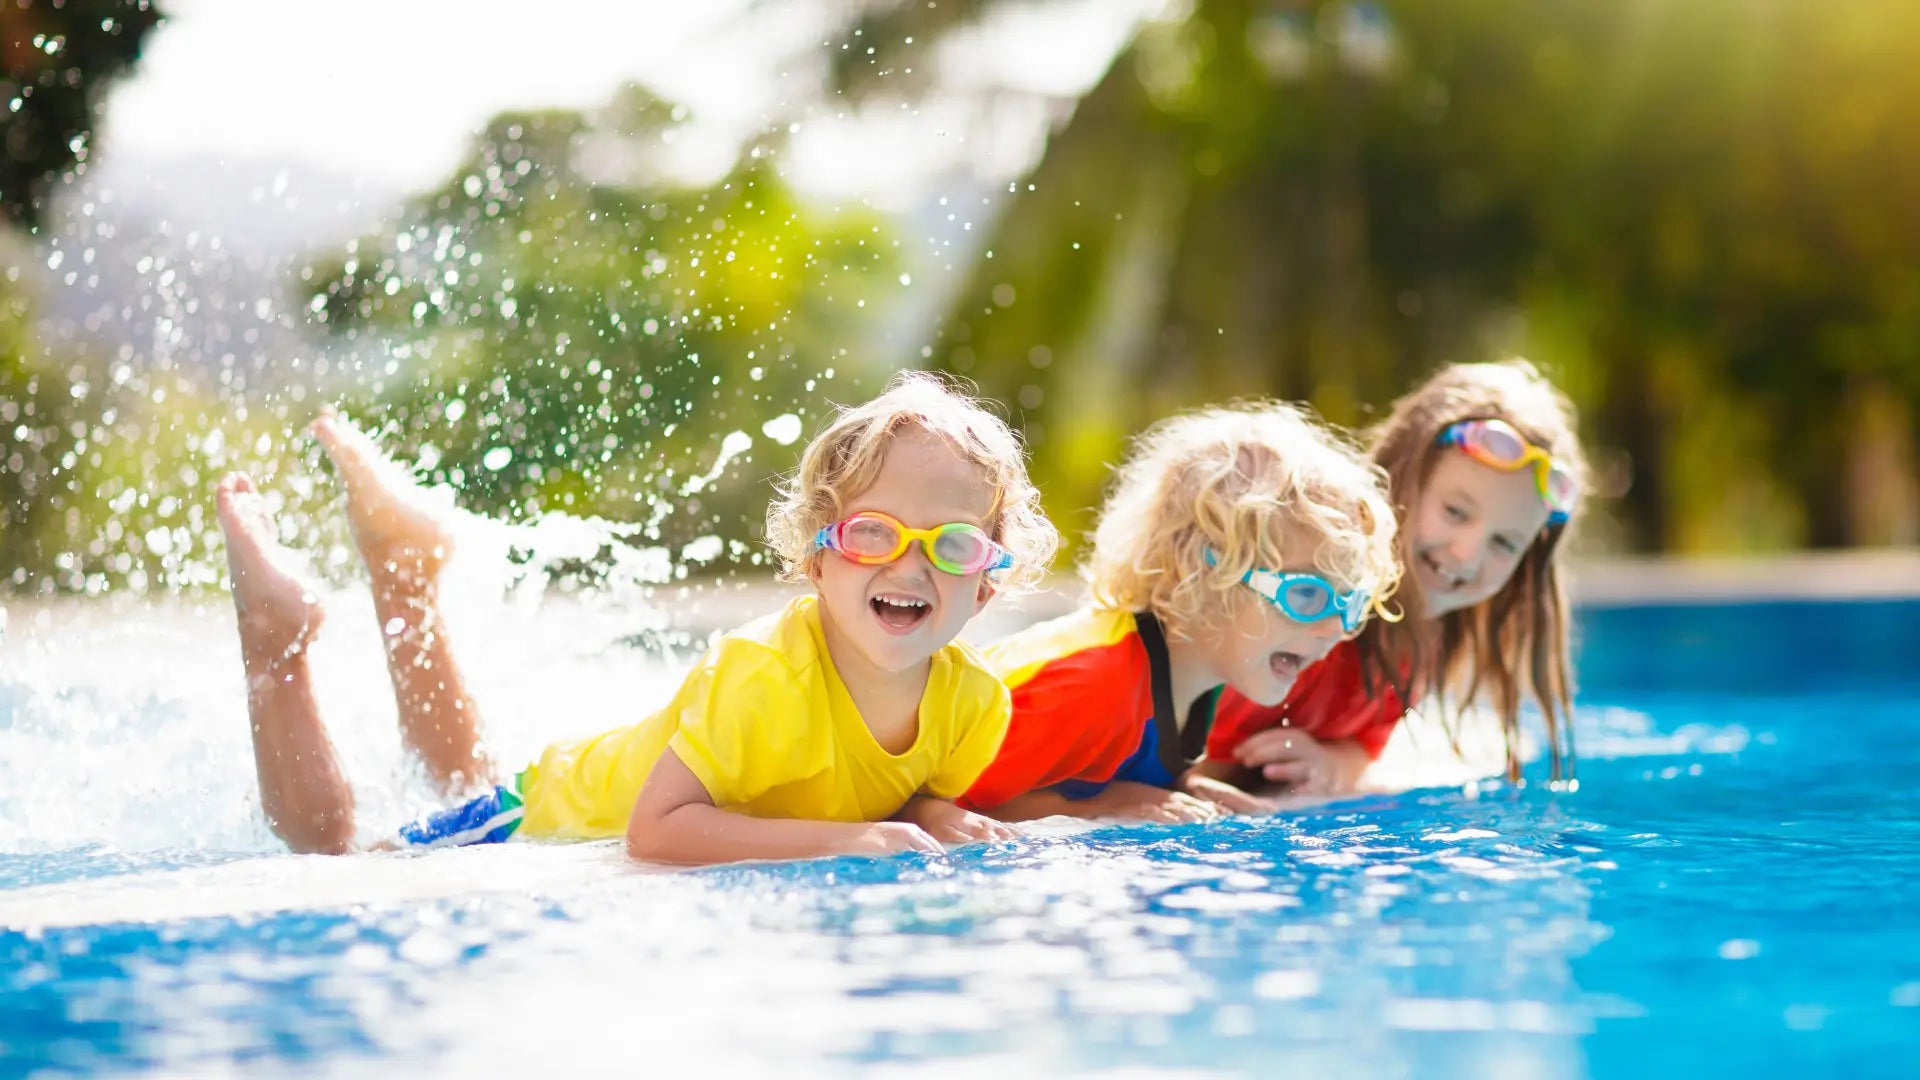 Will swimming in a pool trigger my child's eczema?